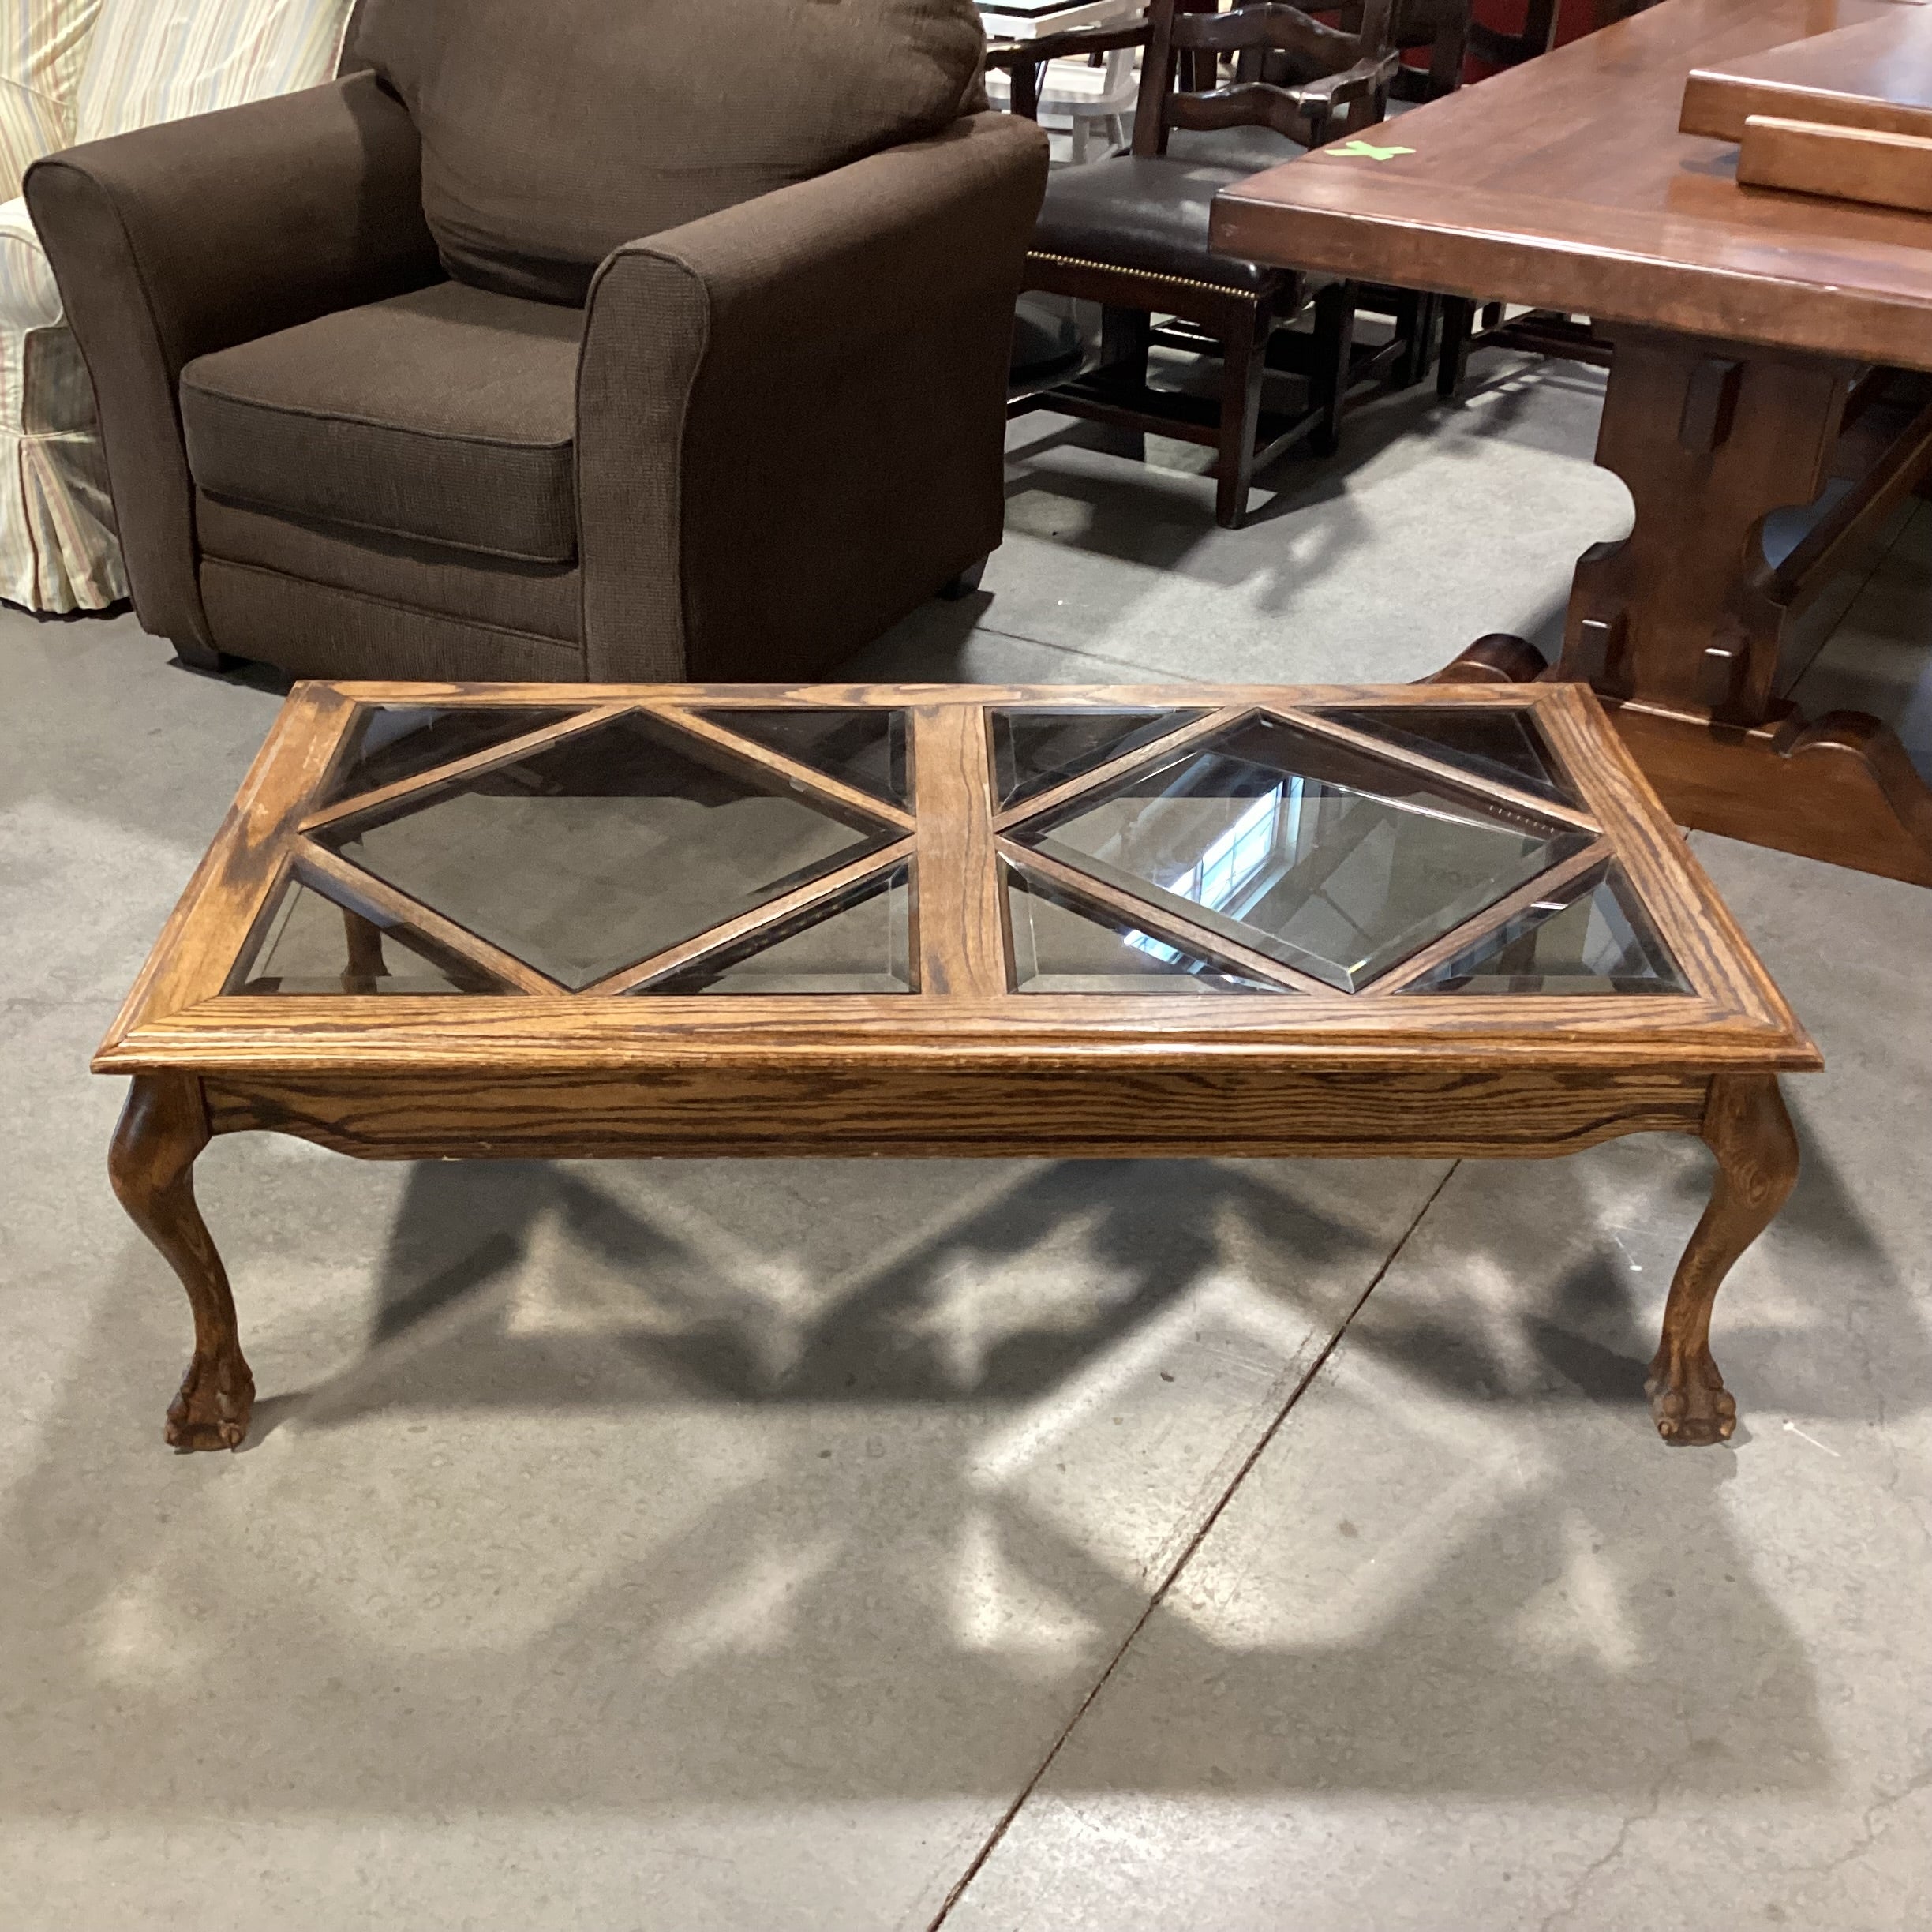 Carved Wood Claw Foot & Inset Glass Coffee Table 52.5"x 28"x 16"